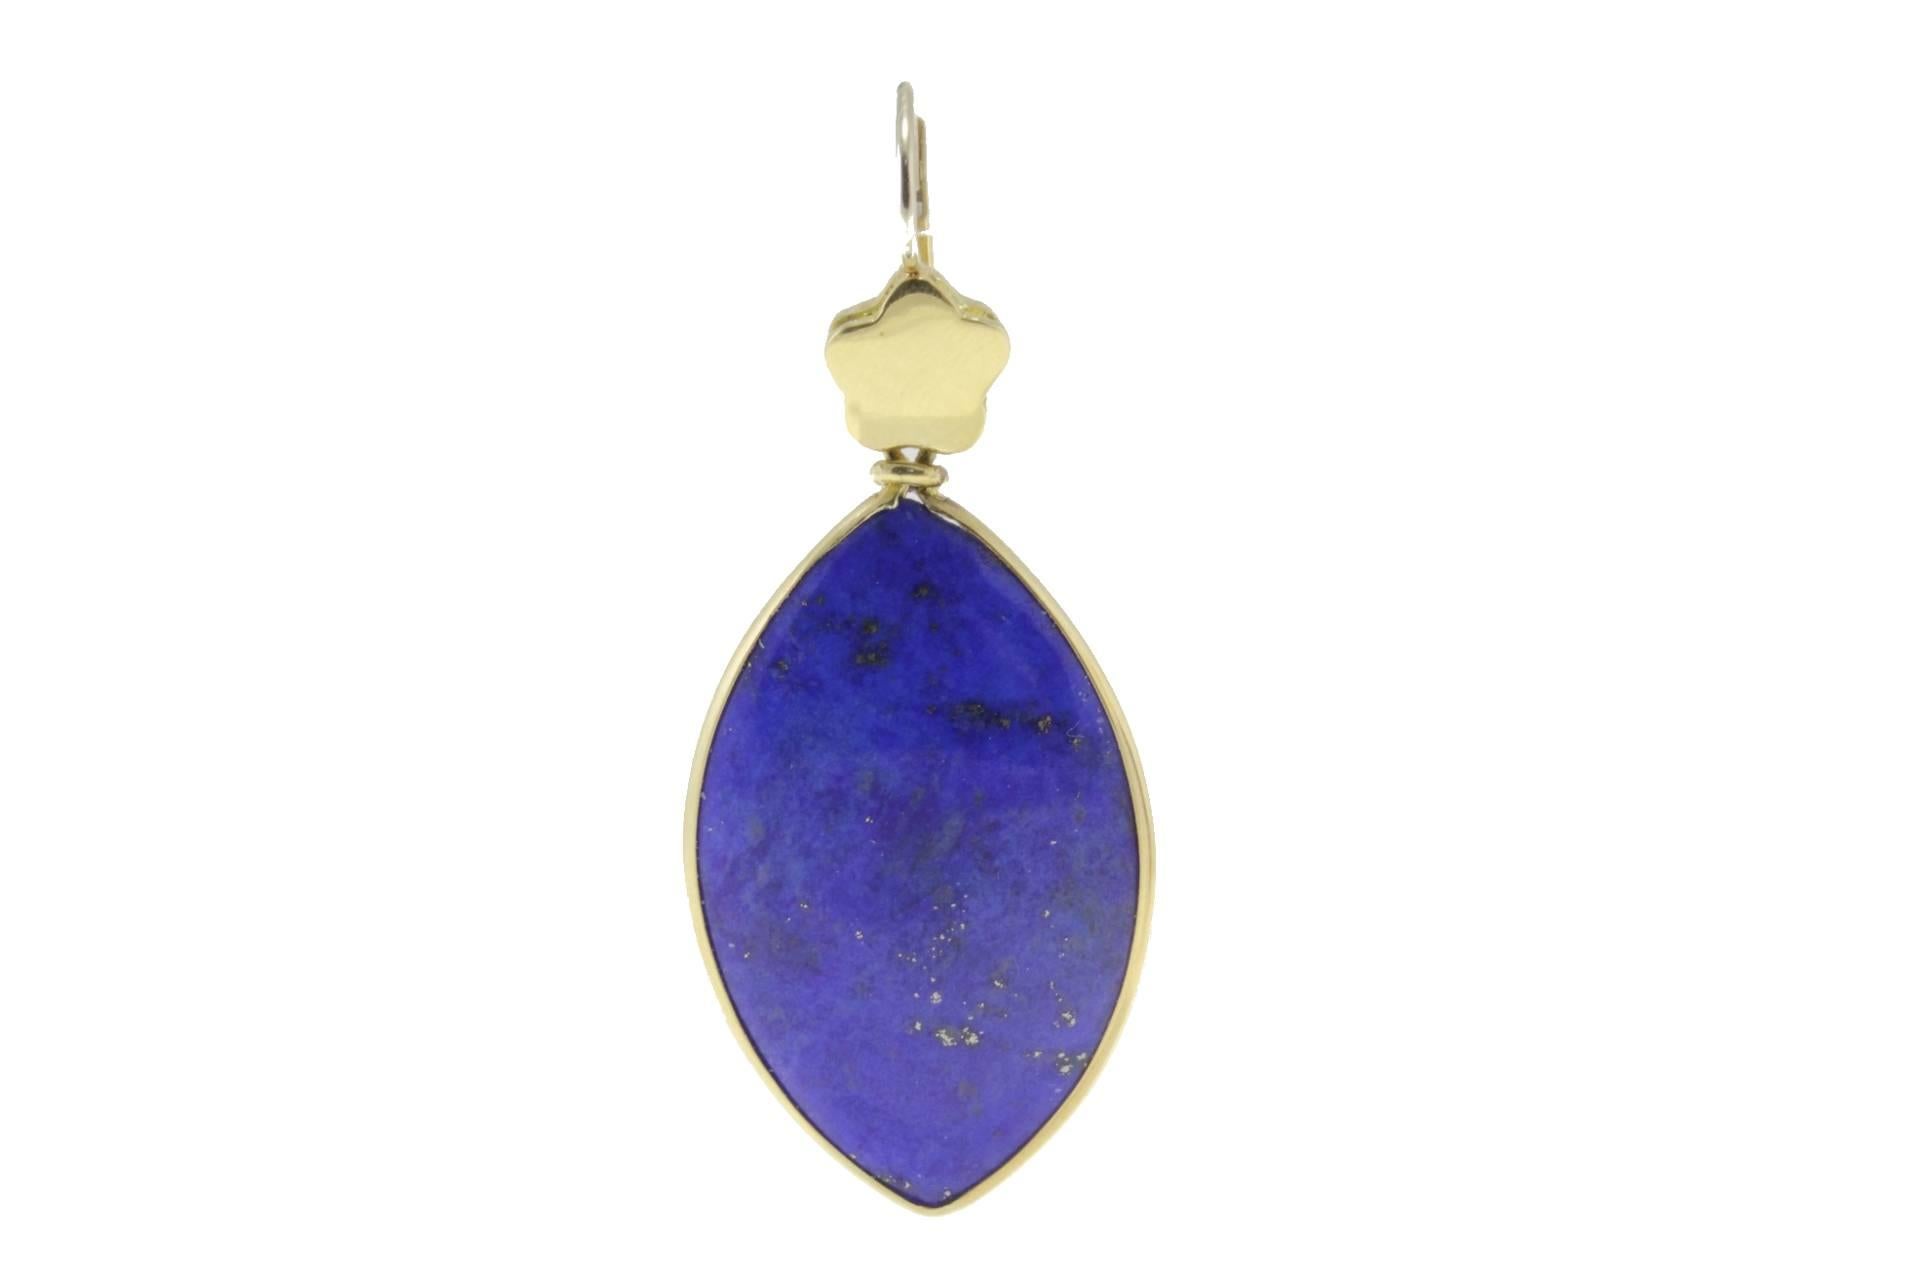 Dangle earrings in 18k yellow gold mounted with lapis.
Lapis 9.50 gr
Tot.Weight 16.90 gr
R.F ggfa